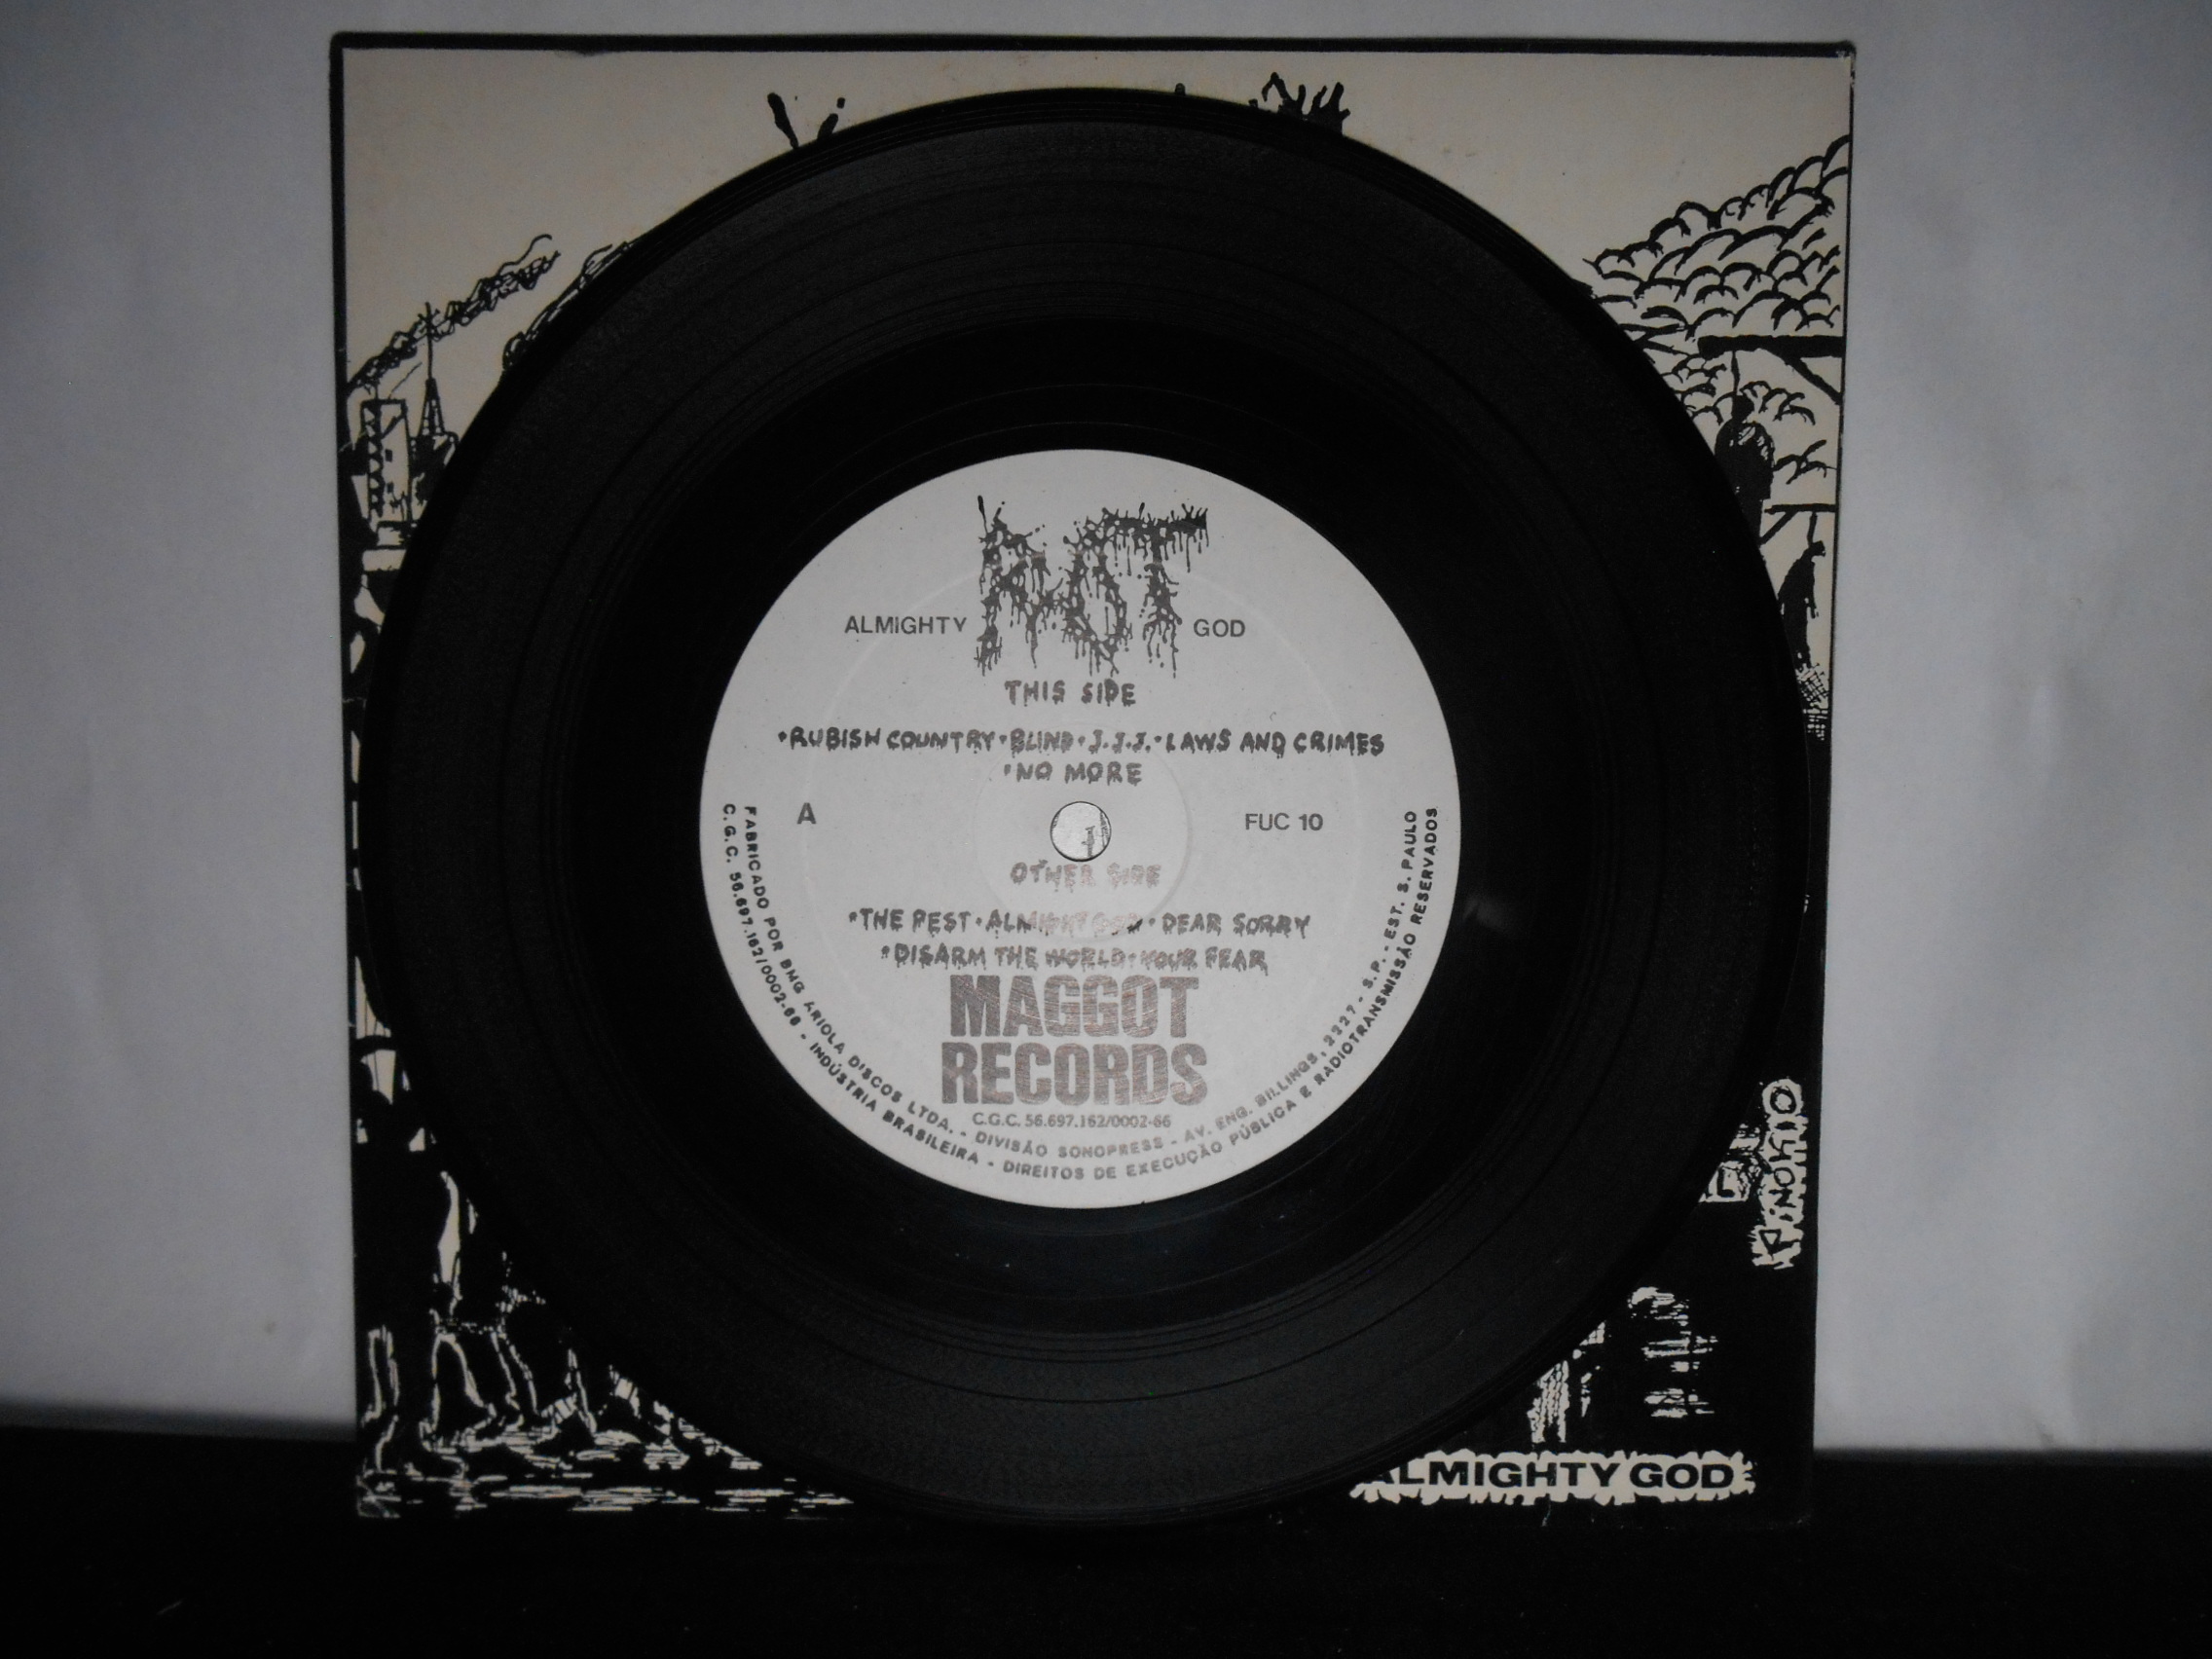 Vinil Compacto - Rot - Almighty God